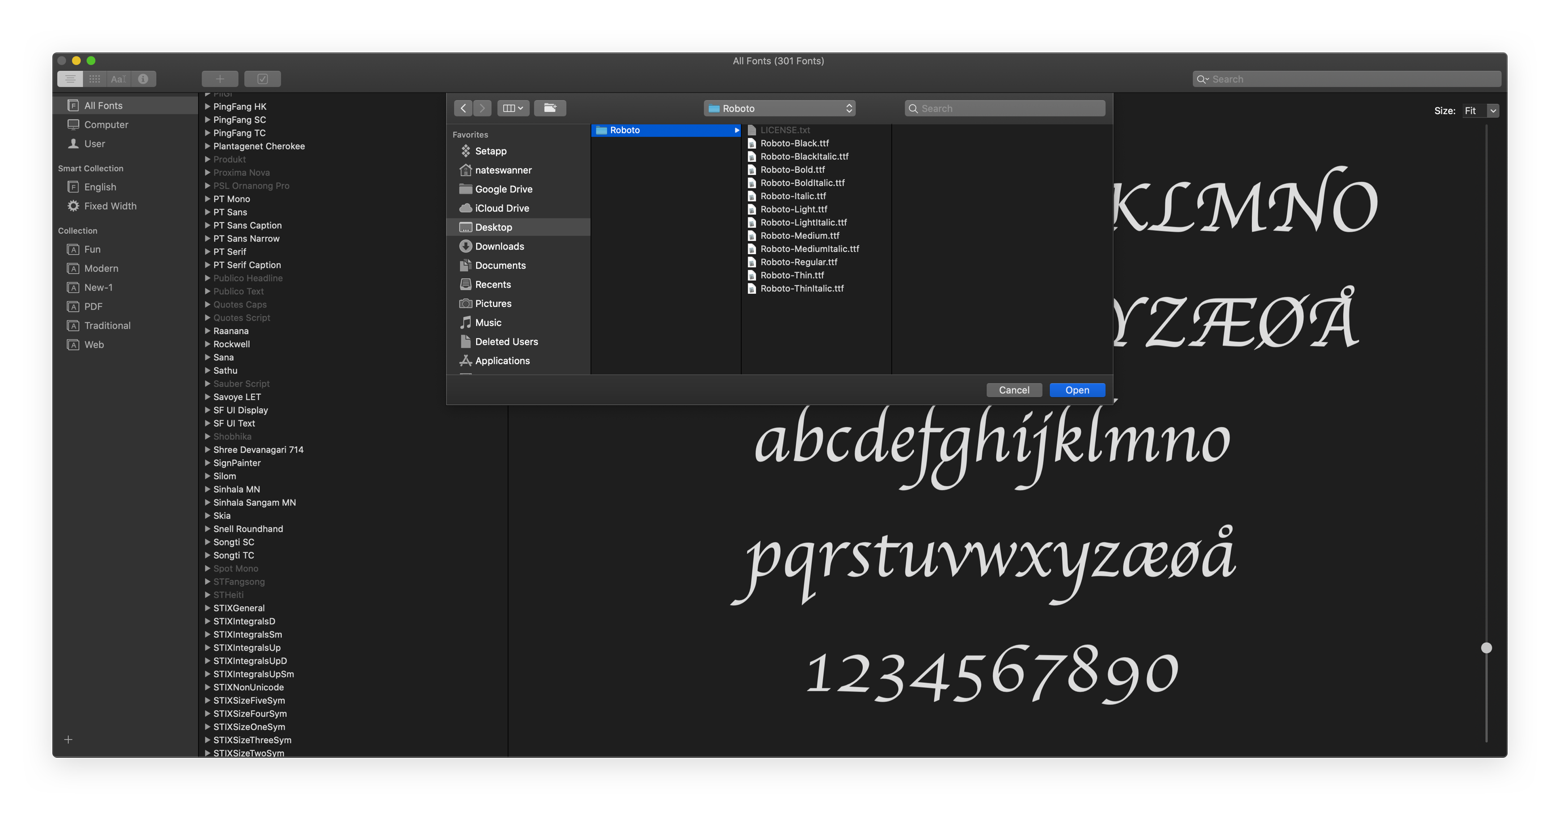 add fonts to office for mac